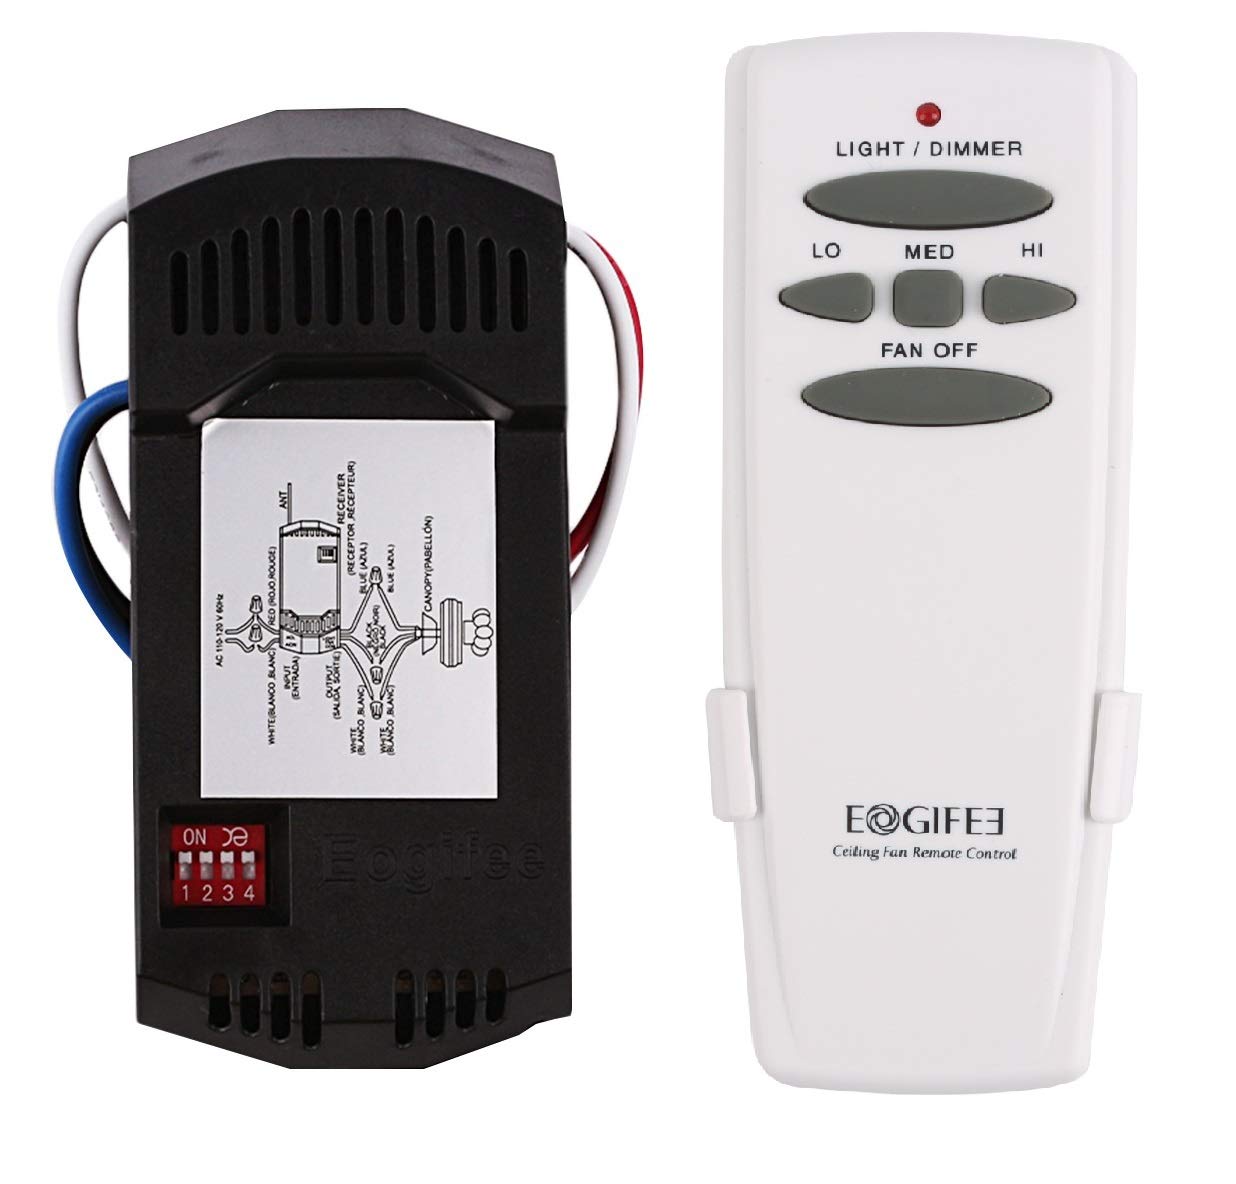 Eogifee Universal Ceiling Fan Remote Control and Receiver ...